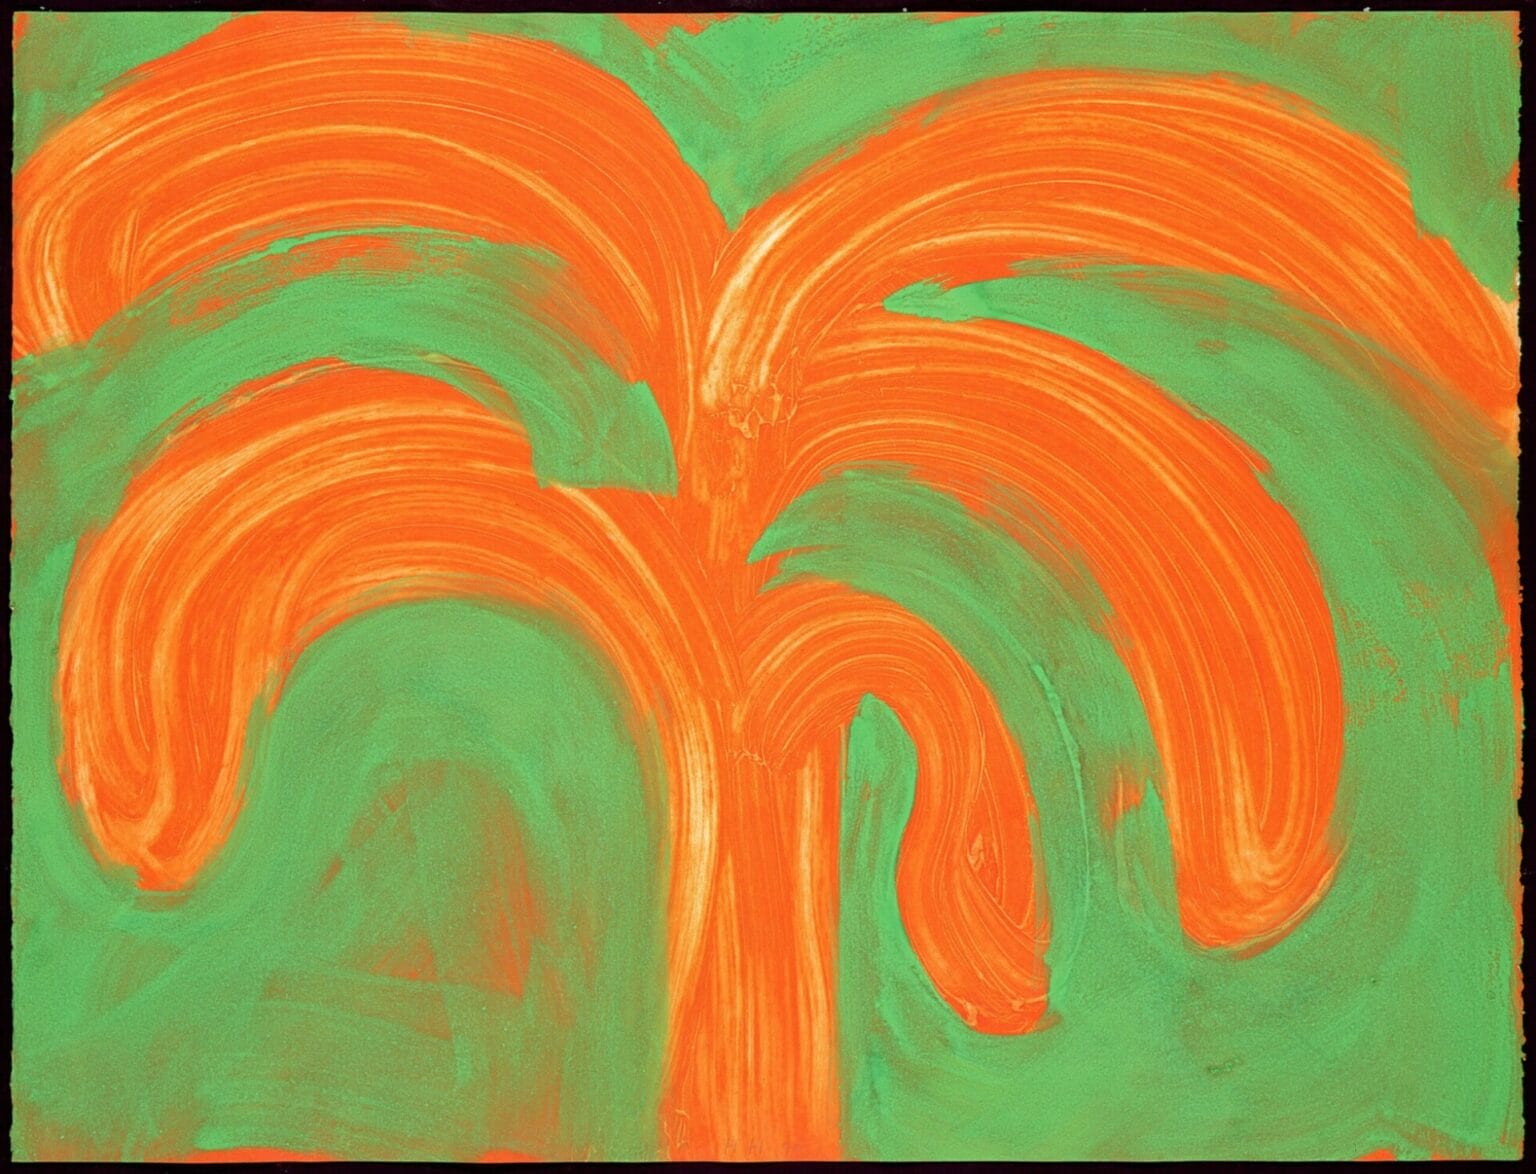 Howard Hodgkin, Indian Tree, 1990-1991, Intaglio print with carborundum from one aluminium plate, hand colouring in tempera, 107 x 137 cm, Image courtesy of the Howard Hodgkin Estate and Cristea Roberts Gallery, London.